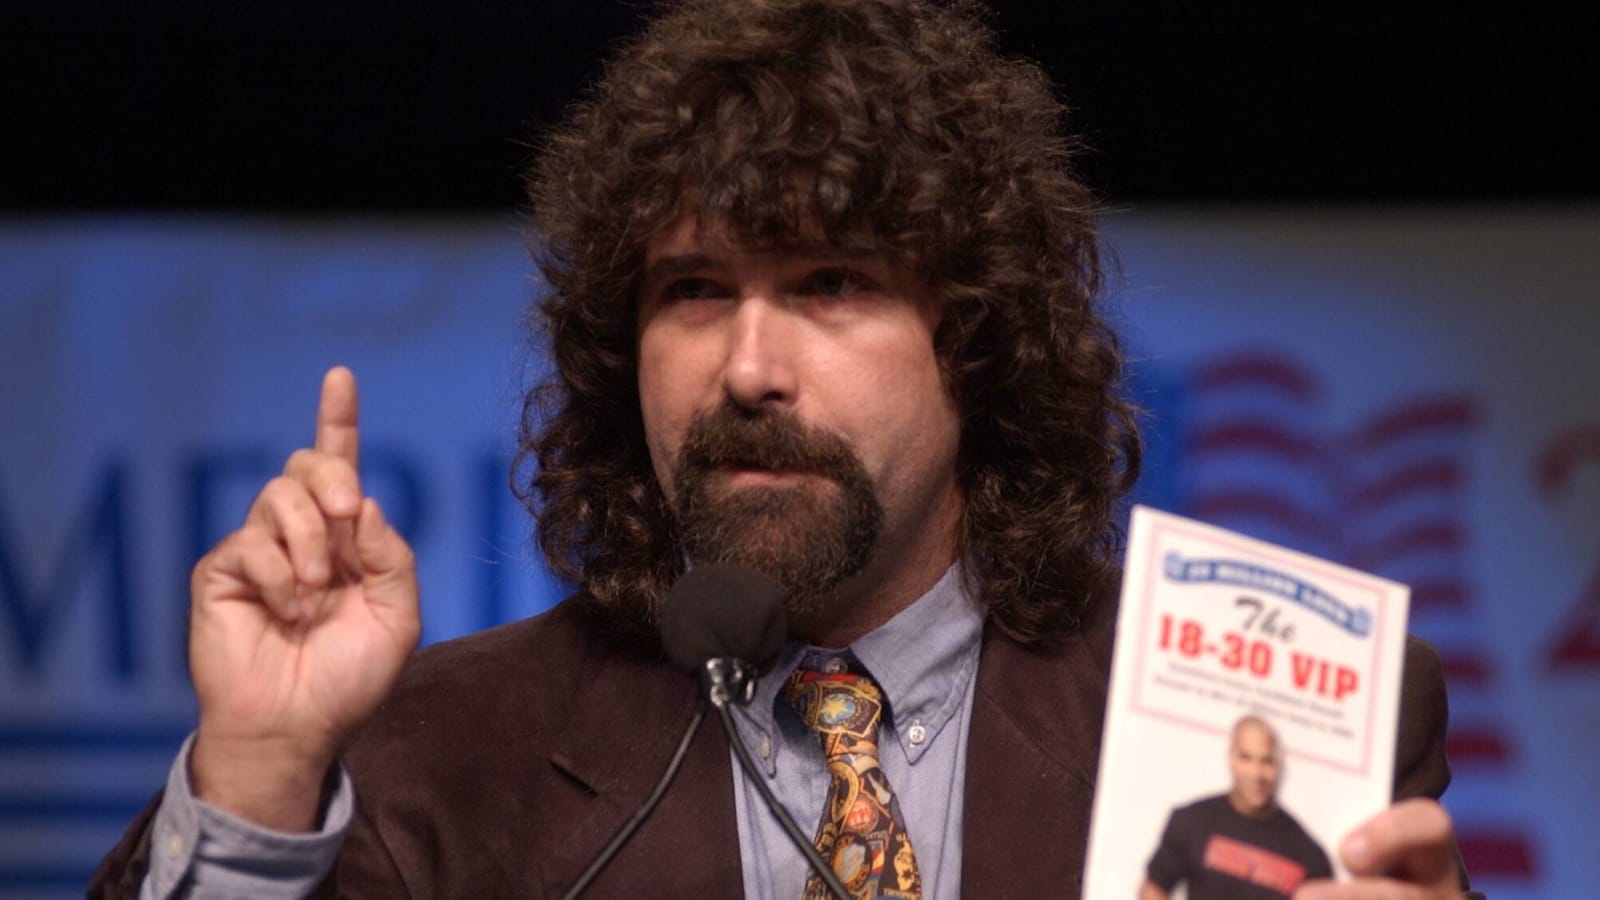 Mick Foley has muscular, neurological, and skeletal damage: "I&#39;m paying a steeper price than I thought imaginable"